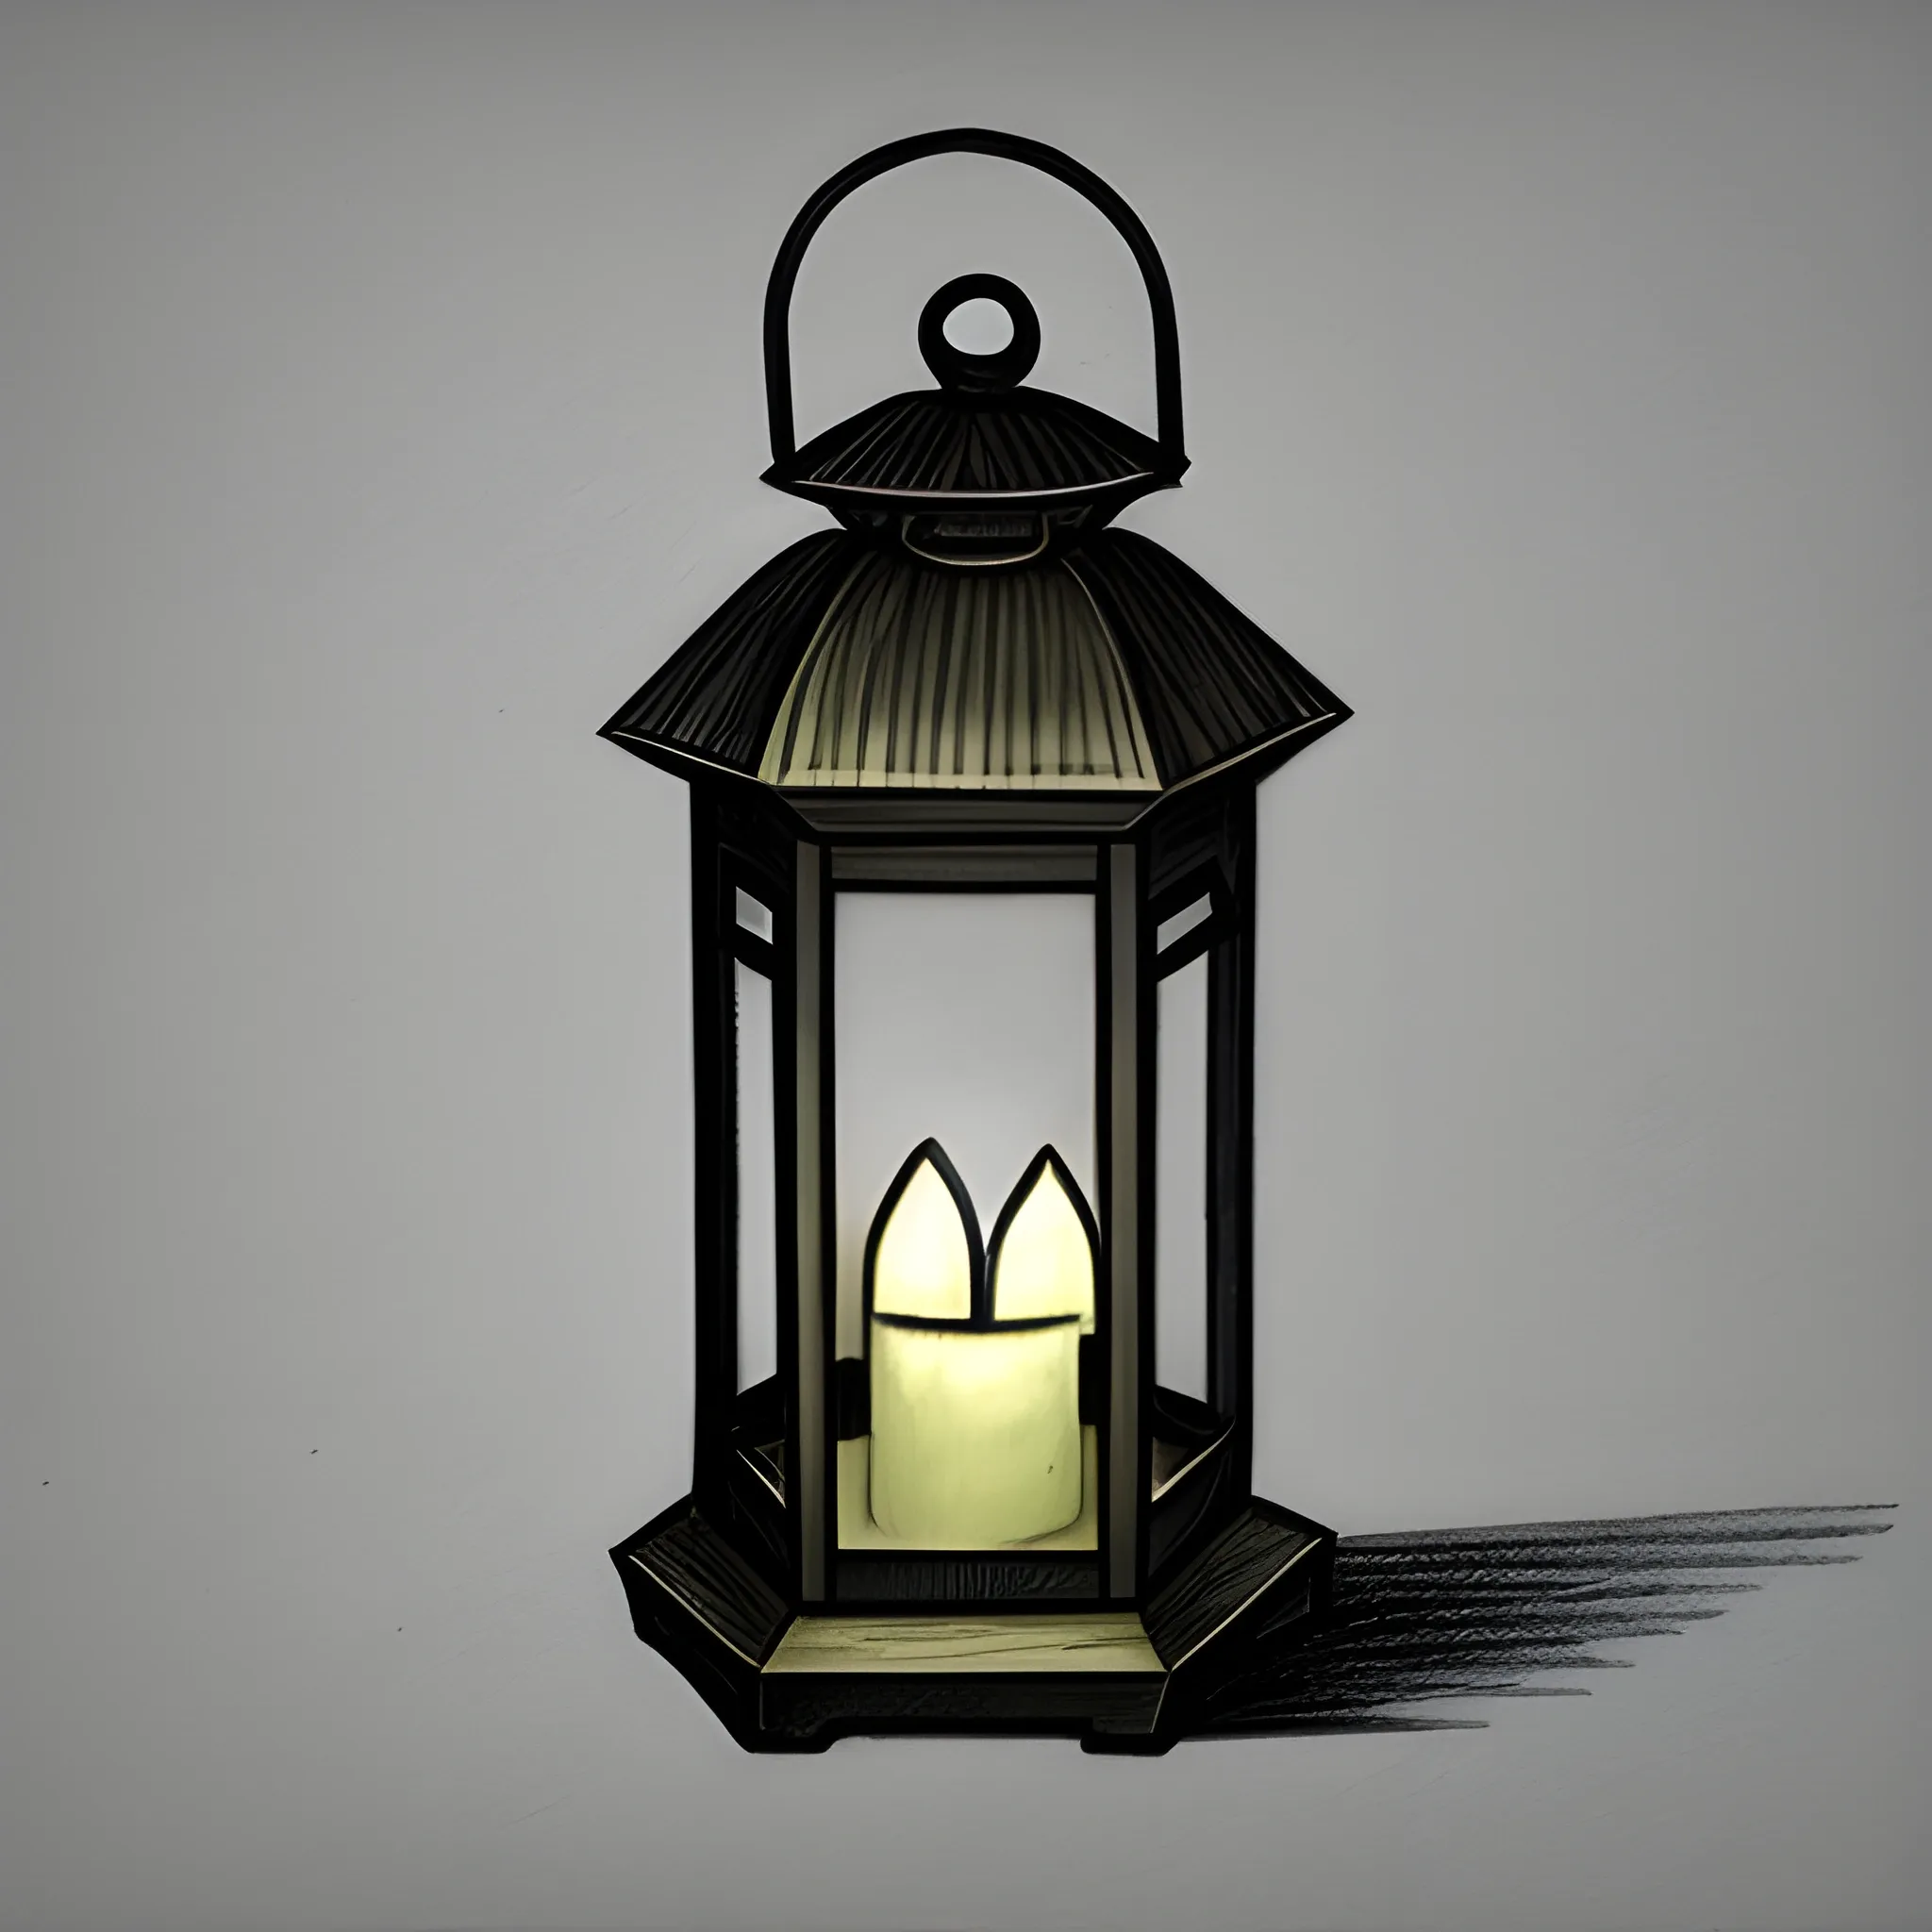 How to Draw a Lantern  Really Easy Drawing Tutorial